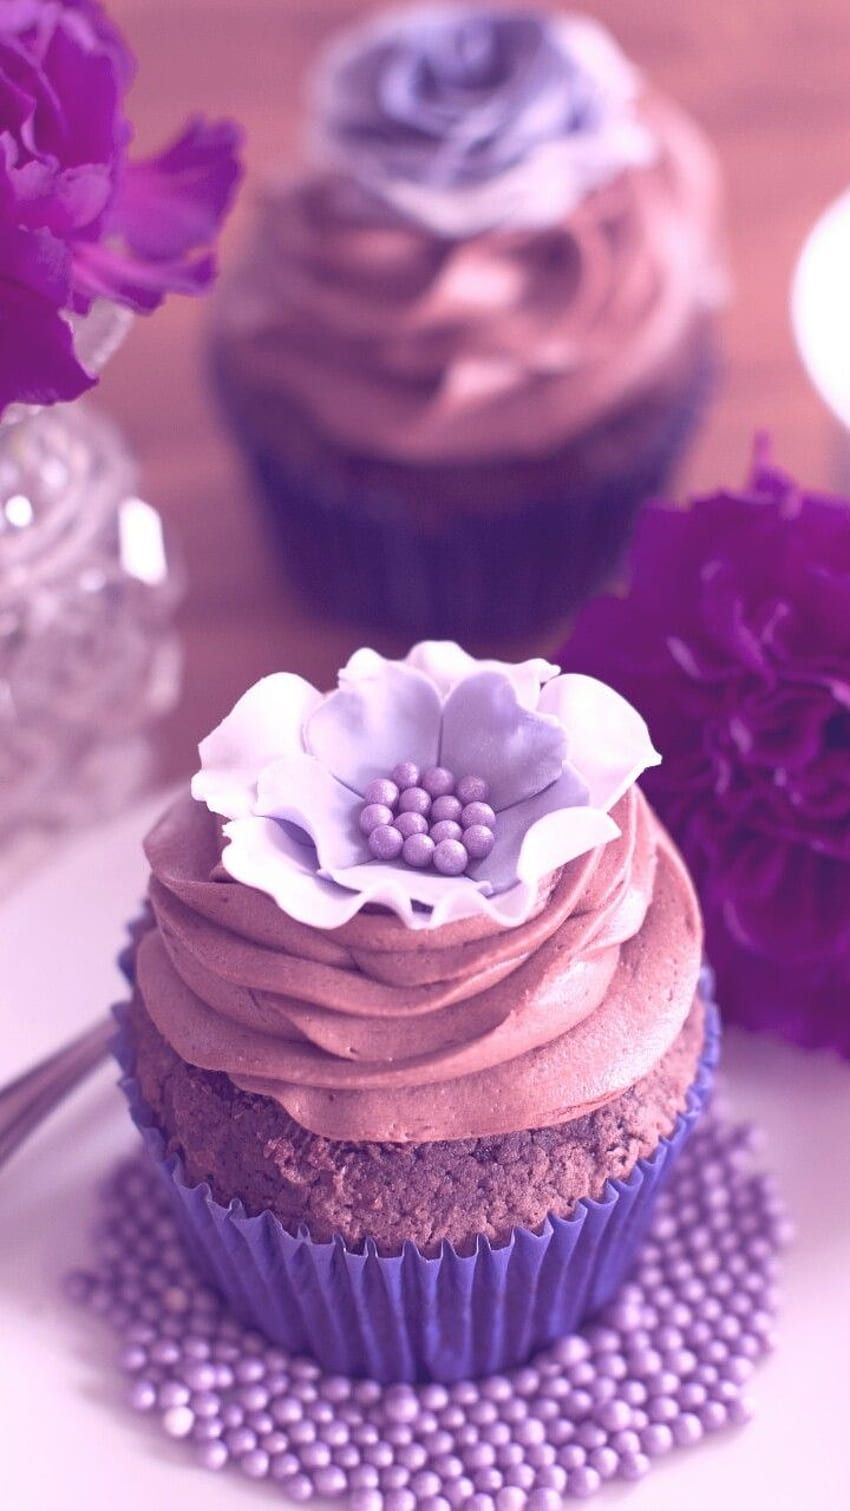 A cupcake with chocolate frosting and a flower on top. - Cupcakes